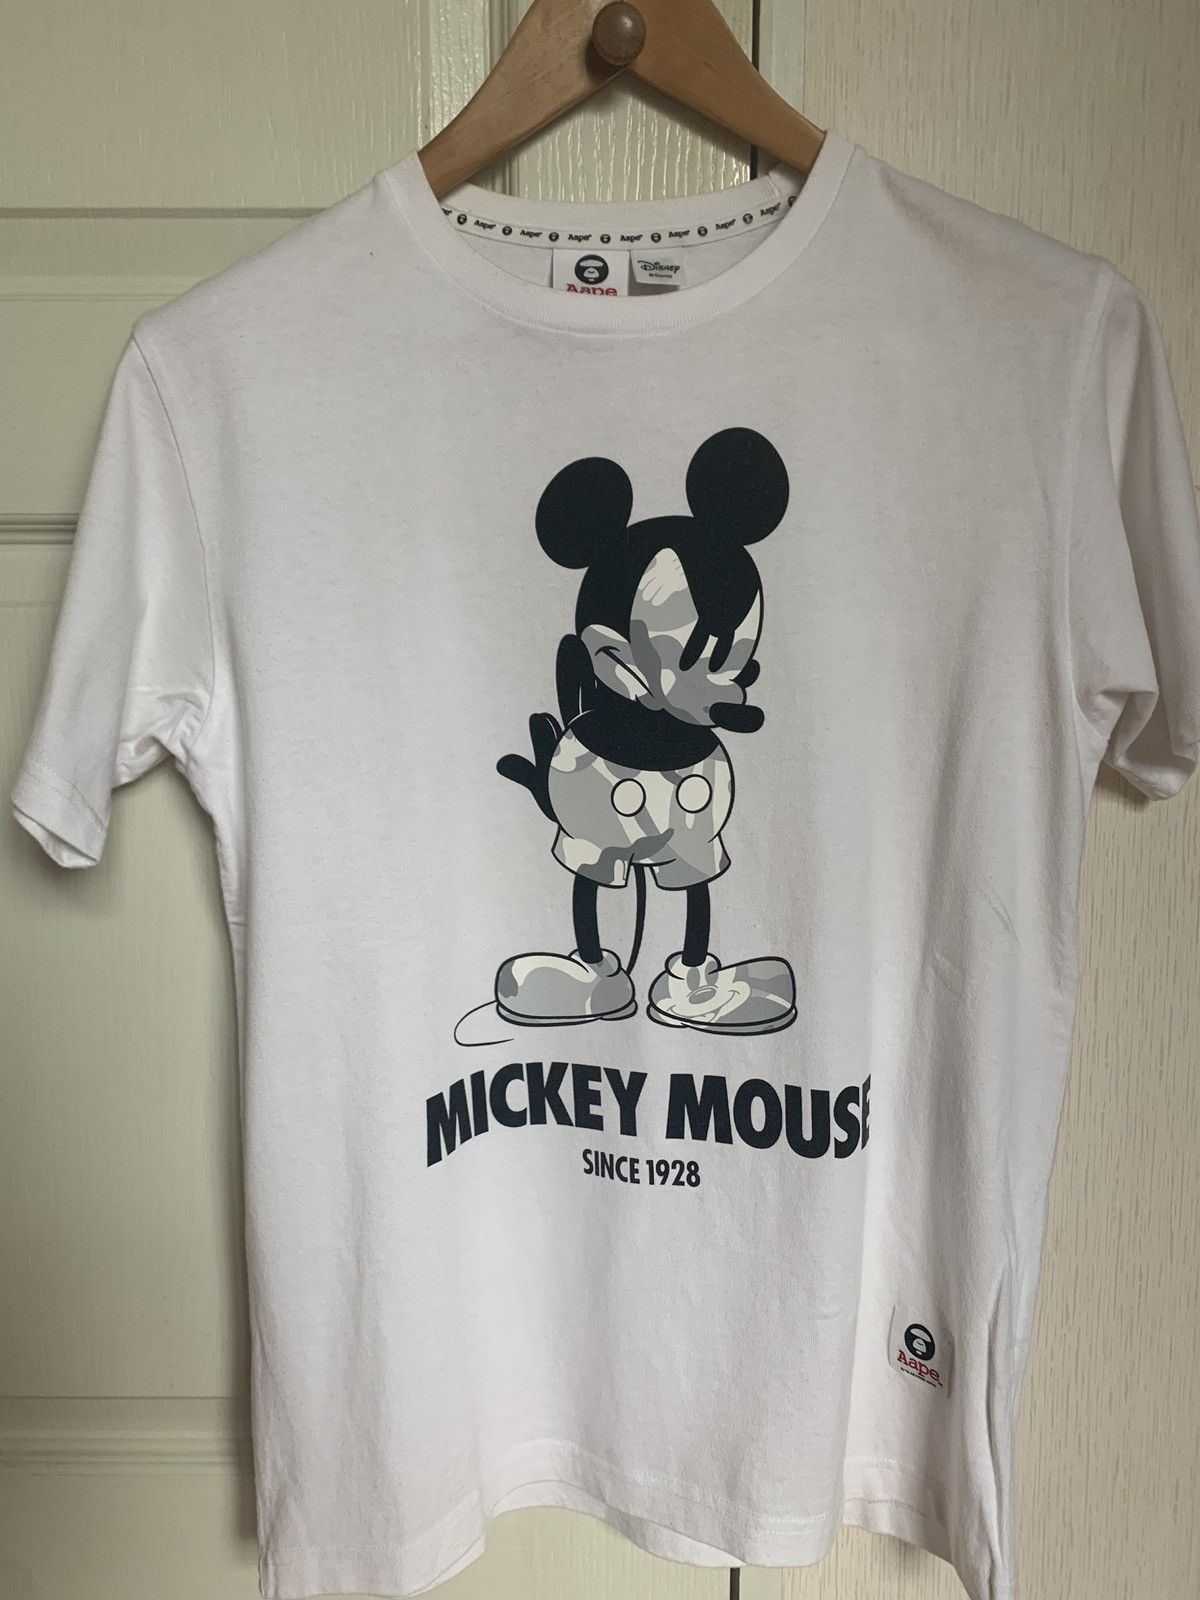 Aape AAPE x DISNEY Mickey Mouse Tee Small | Grailed